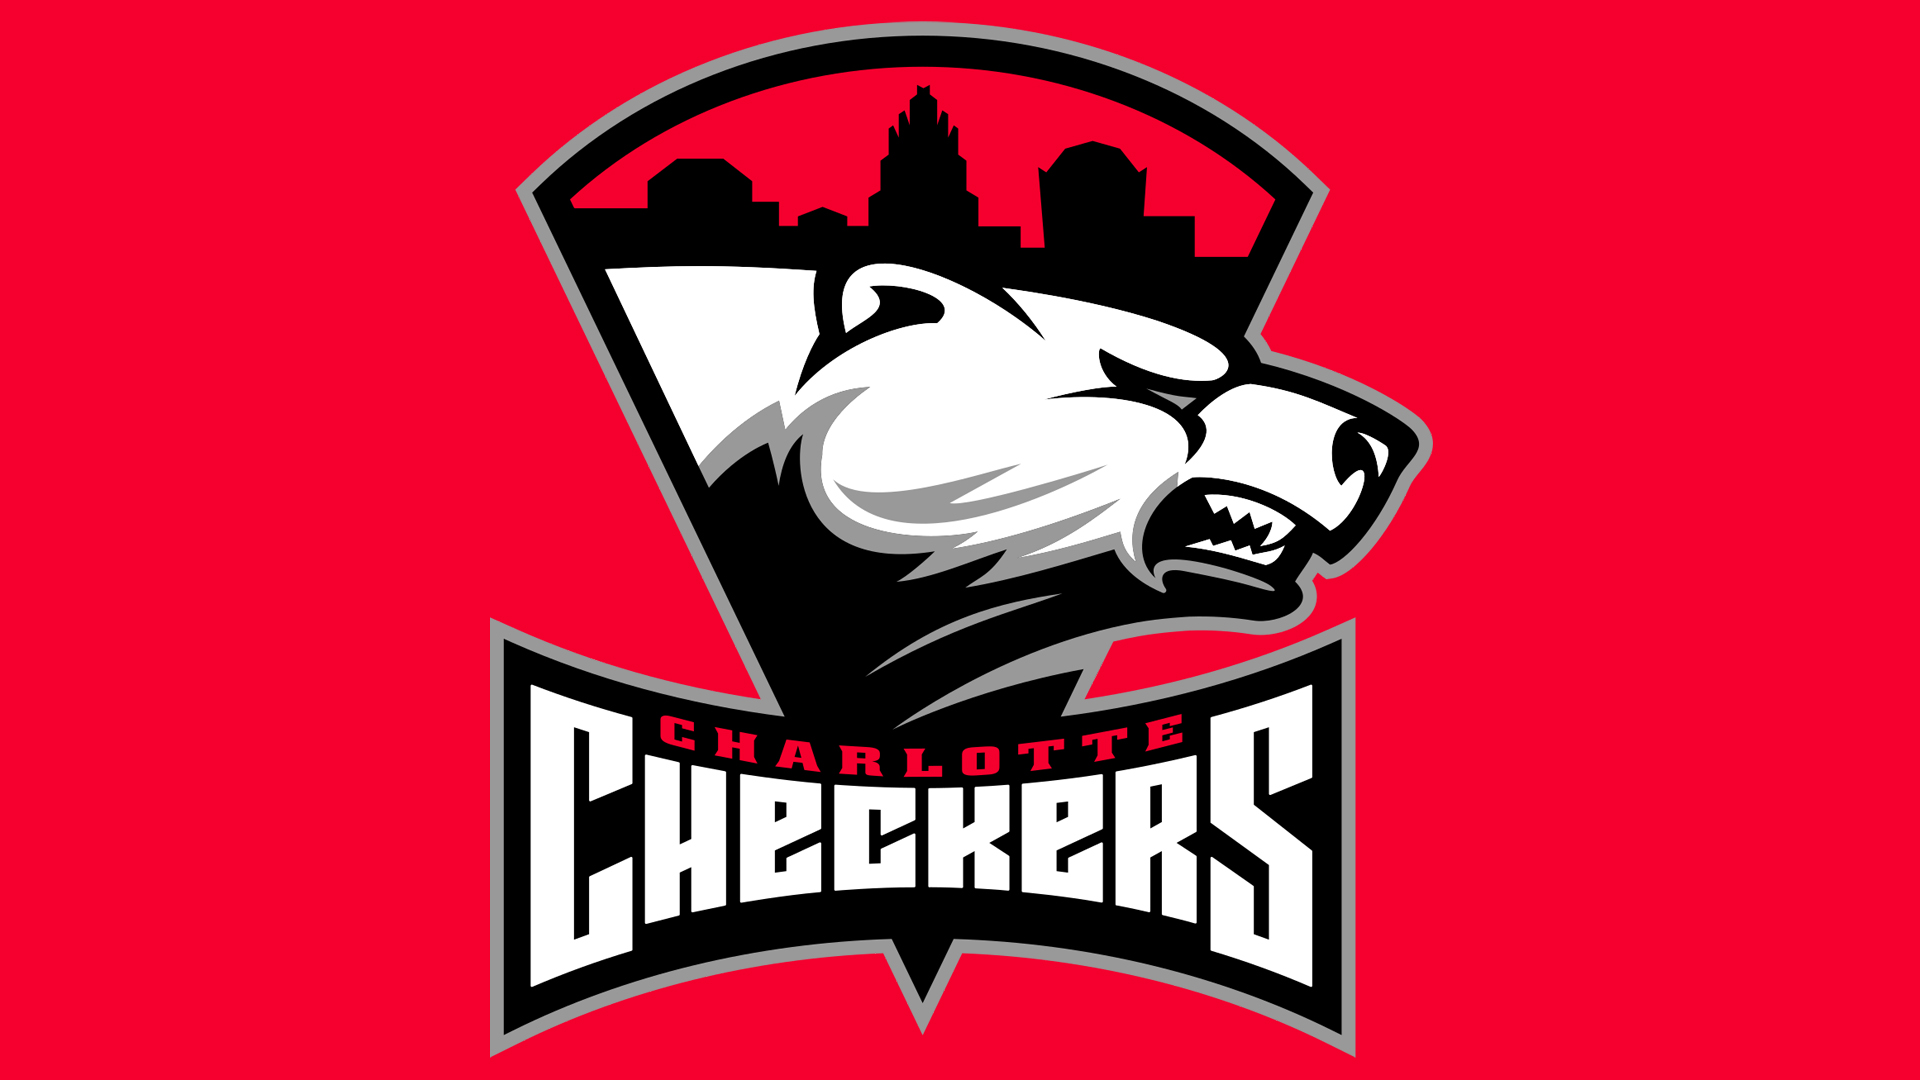 Meaning Charlotte Checkers logo and symbol.